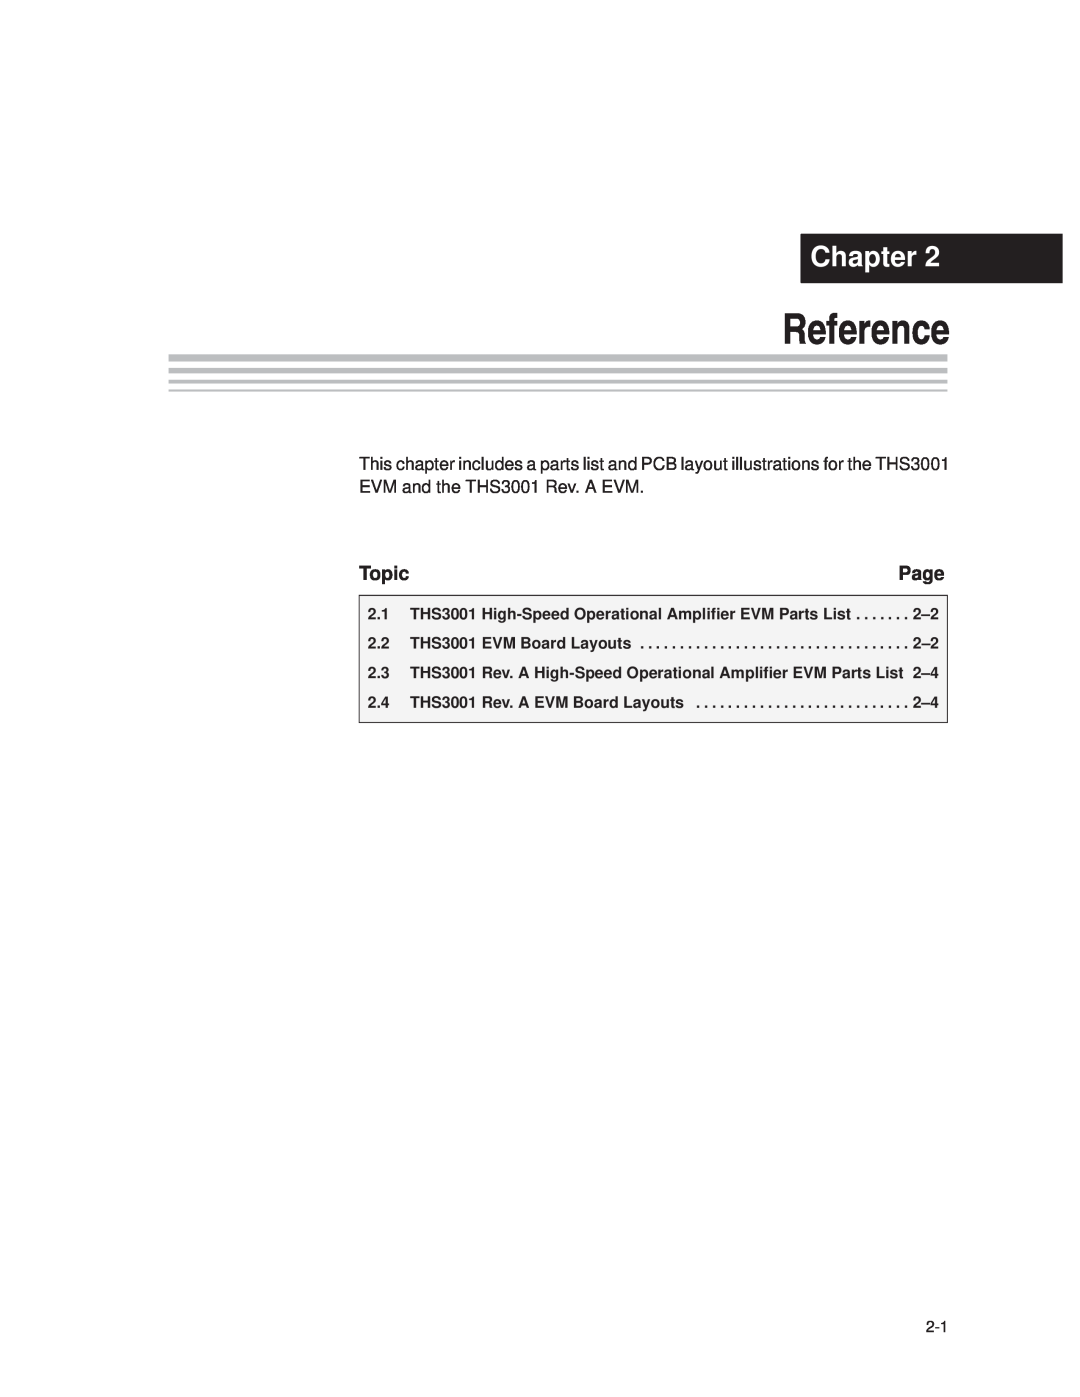 Texas Instruments THS3001 manual Reference, Chapter, Page, Topic 